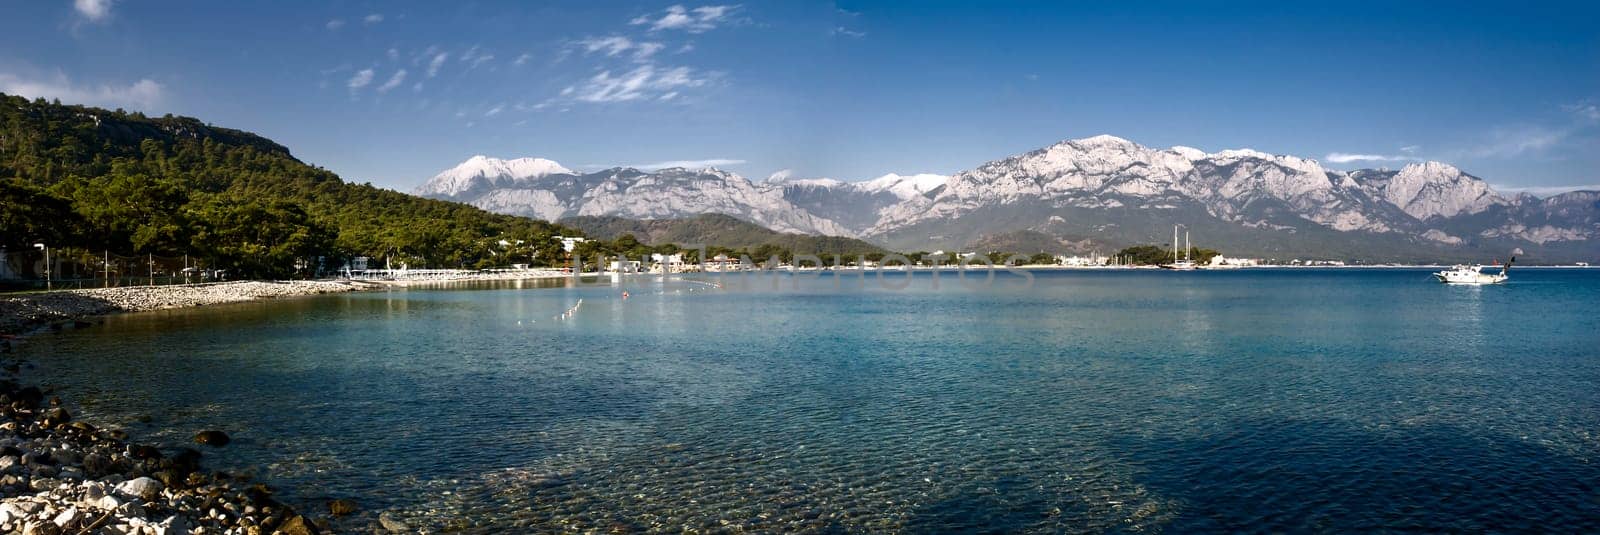 View of the Kemer bay by Giamplume